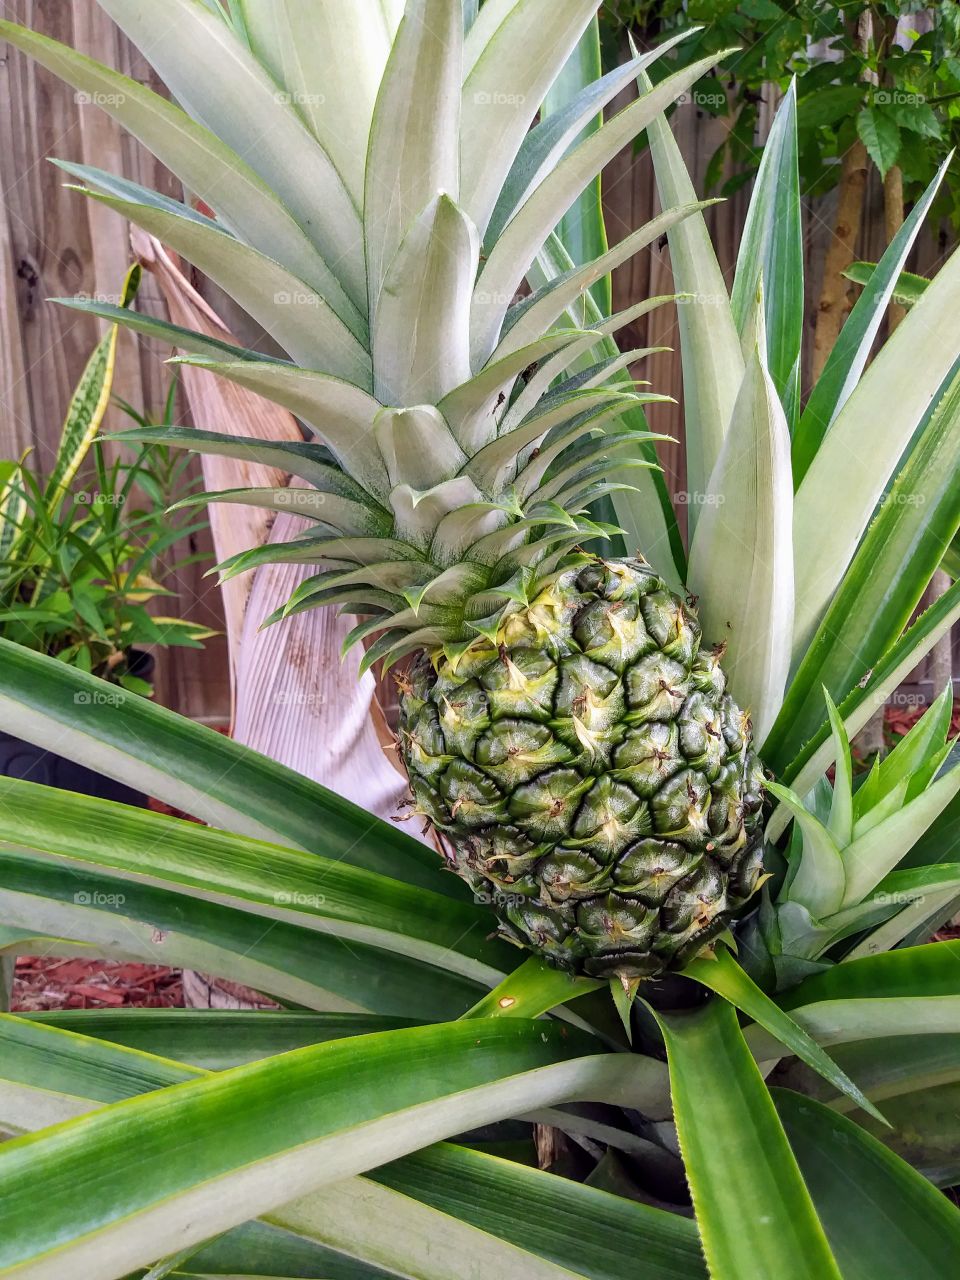 pineapple growing from ano